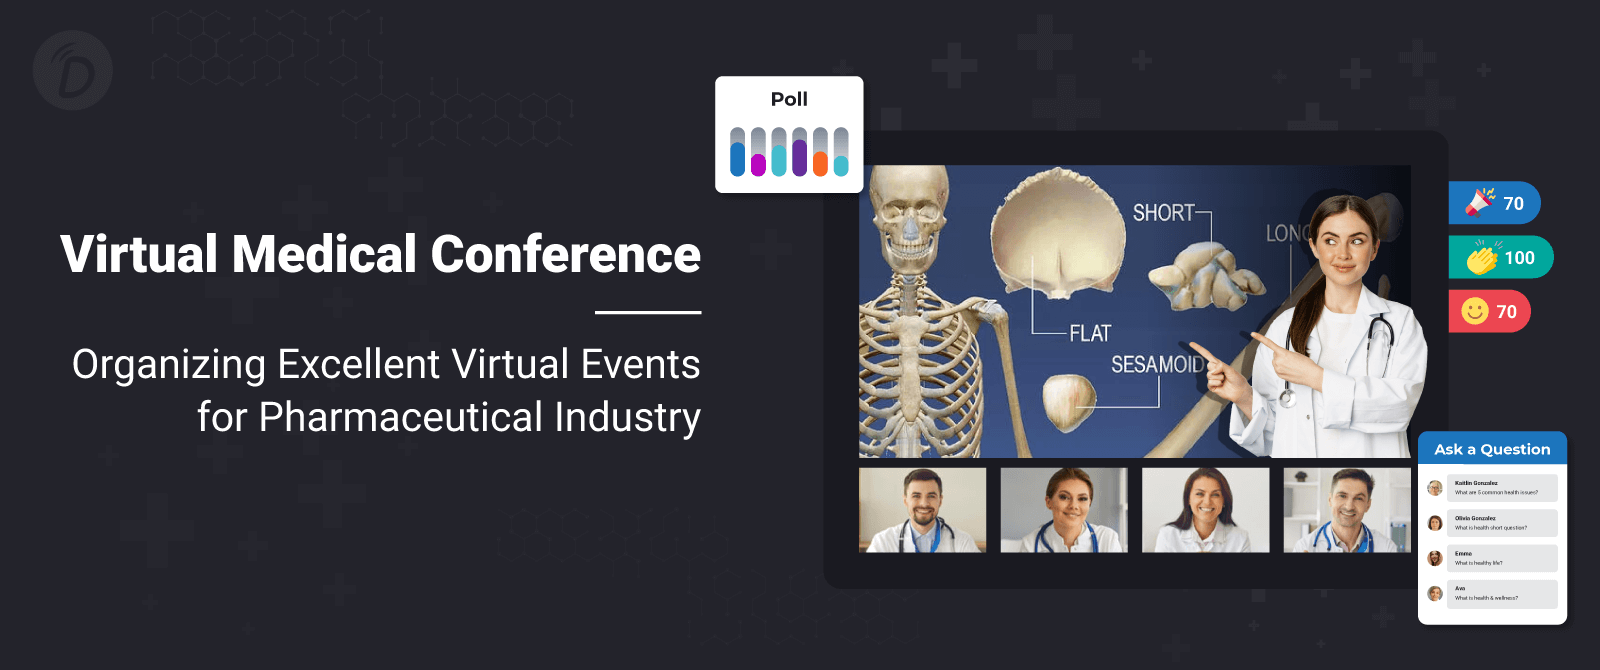 Virtual Medical Conference: Organizing Excellent Virtual Events for Pharmaceutical Industry